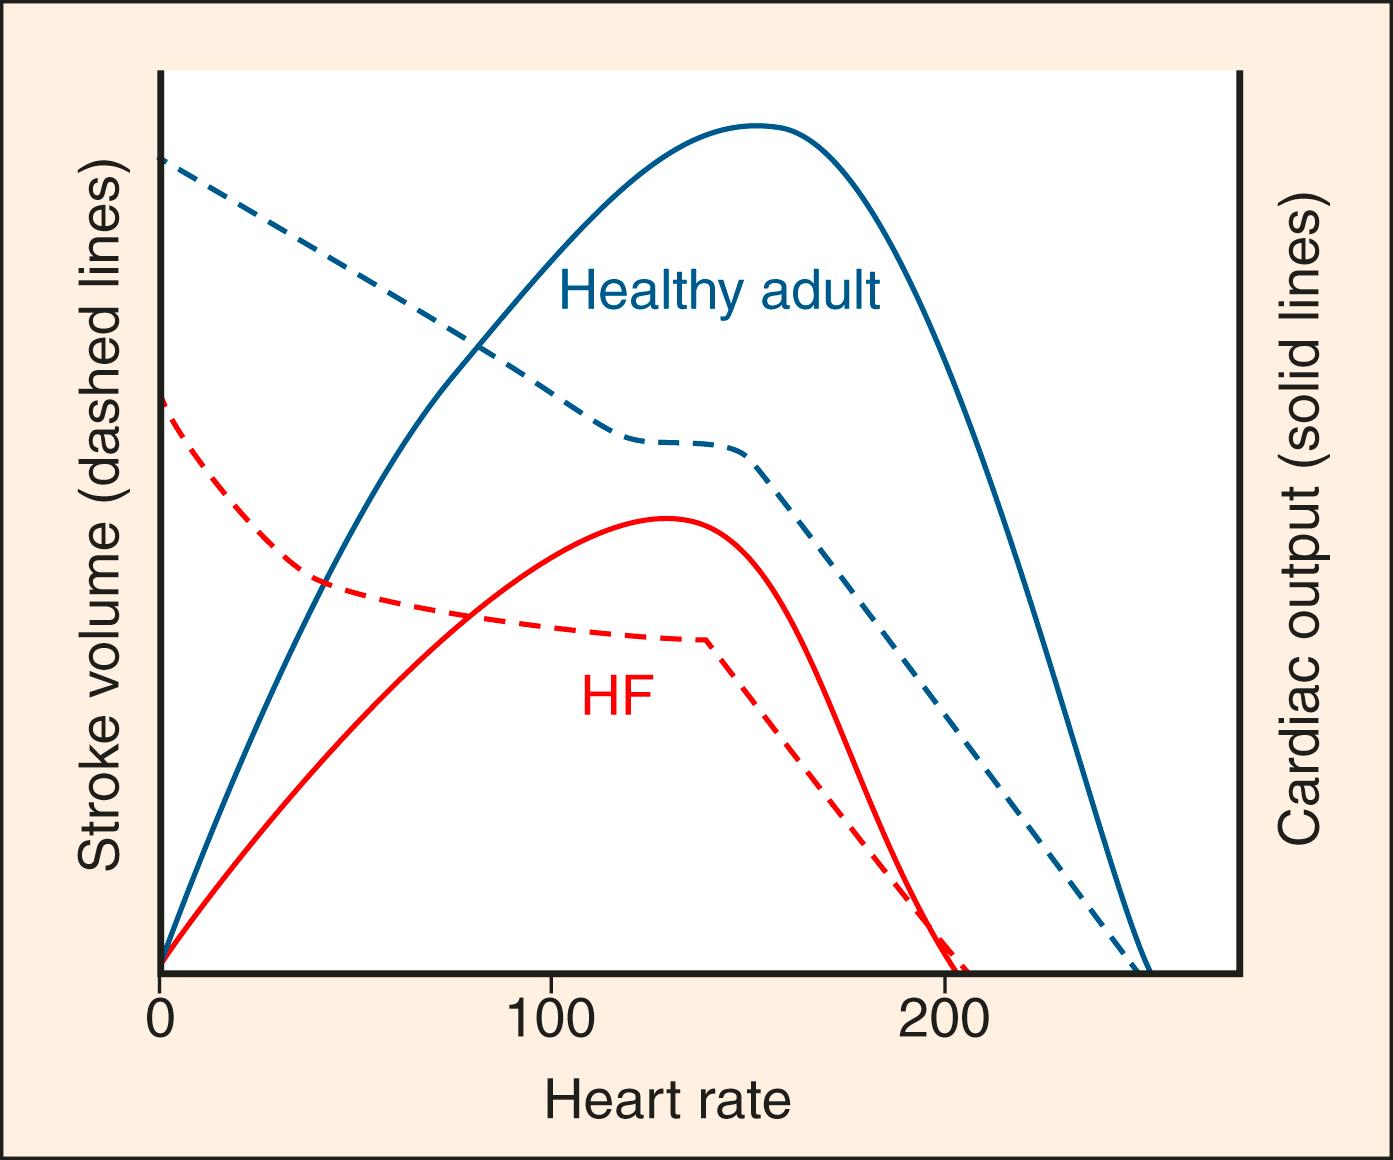 Fig. 67.5, Plot of SV ( dotted line ) or CO ( solid line ) versus HR for healthy and impaired myocardial function ( blue line vs. red line , respectively). Myocardial stimulation in response to physiologic demands (eg, sympathetic drive in response to a physiologic stressor), can compensate by augmenting SV up to a ceiling dictated by the optimization of inotropy and lusitropy. Past this SV ceiling, the only way to augment CO to meet even higher physiologic demand is to increase HR (ie, tachycardia in AHF may signify severe mismatch between myocardial function and metabolic demand). After a certain point of tachycardia, SV will worsen due to insufficient time spent in diastole (ie, de-optimized filling time) and further increases in tachycardia will cause CO to decrease (ie, tachydysrhythmias precipitate hemodynamic instability at extremely high HRs in healthy patients, but at lower HRs in acute or chronic myocardial dysfunction). SV , stroke volume; CO , cardiac output; HR , heart rate; AHF , acute heart failure.